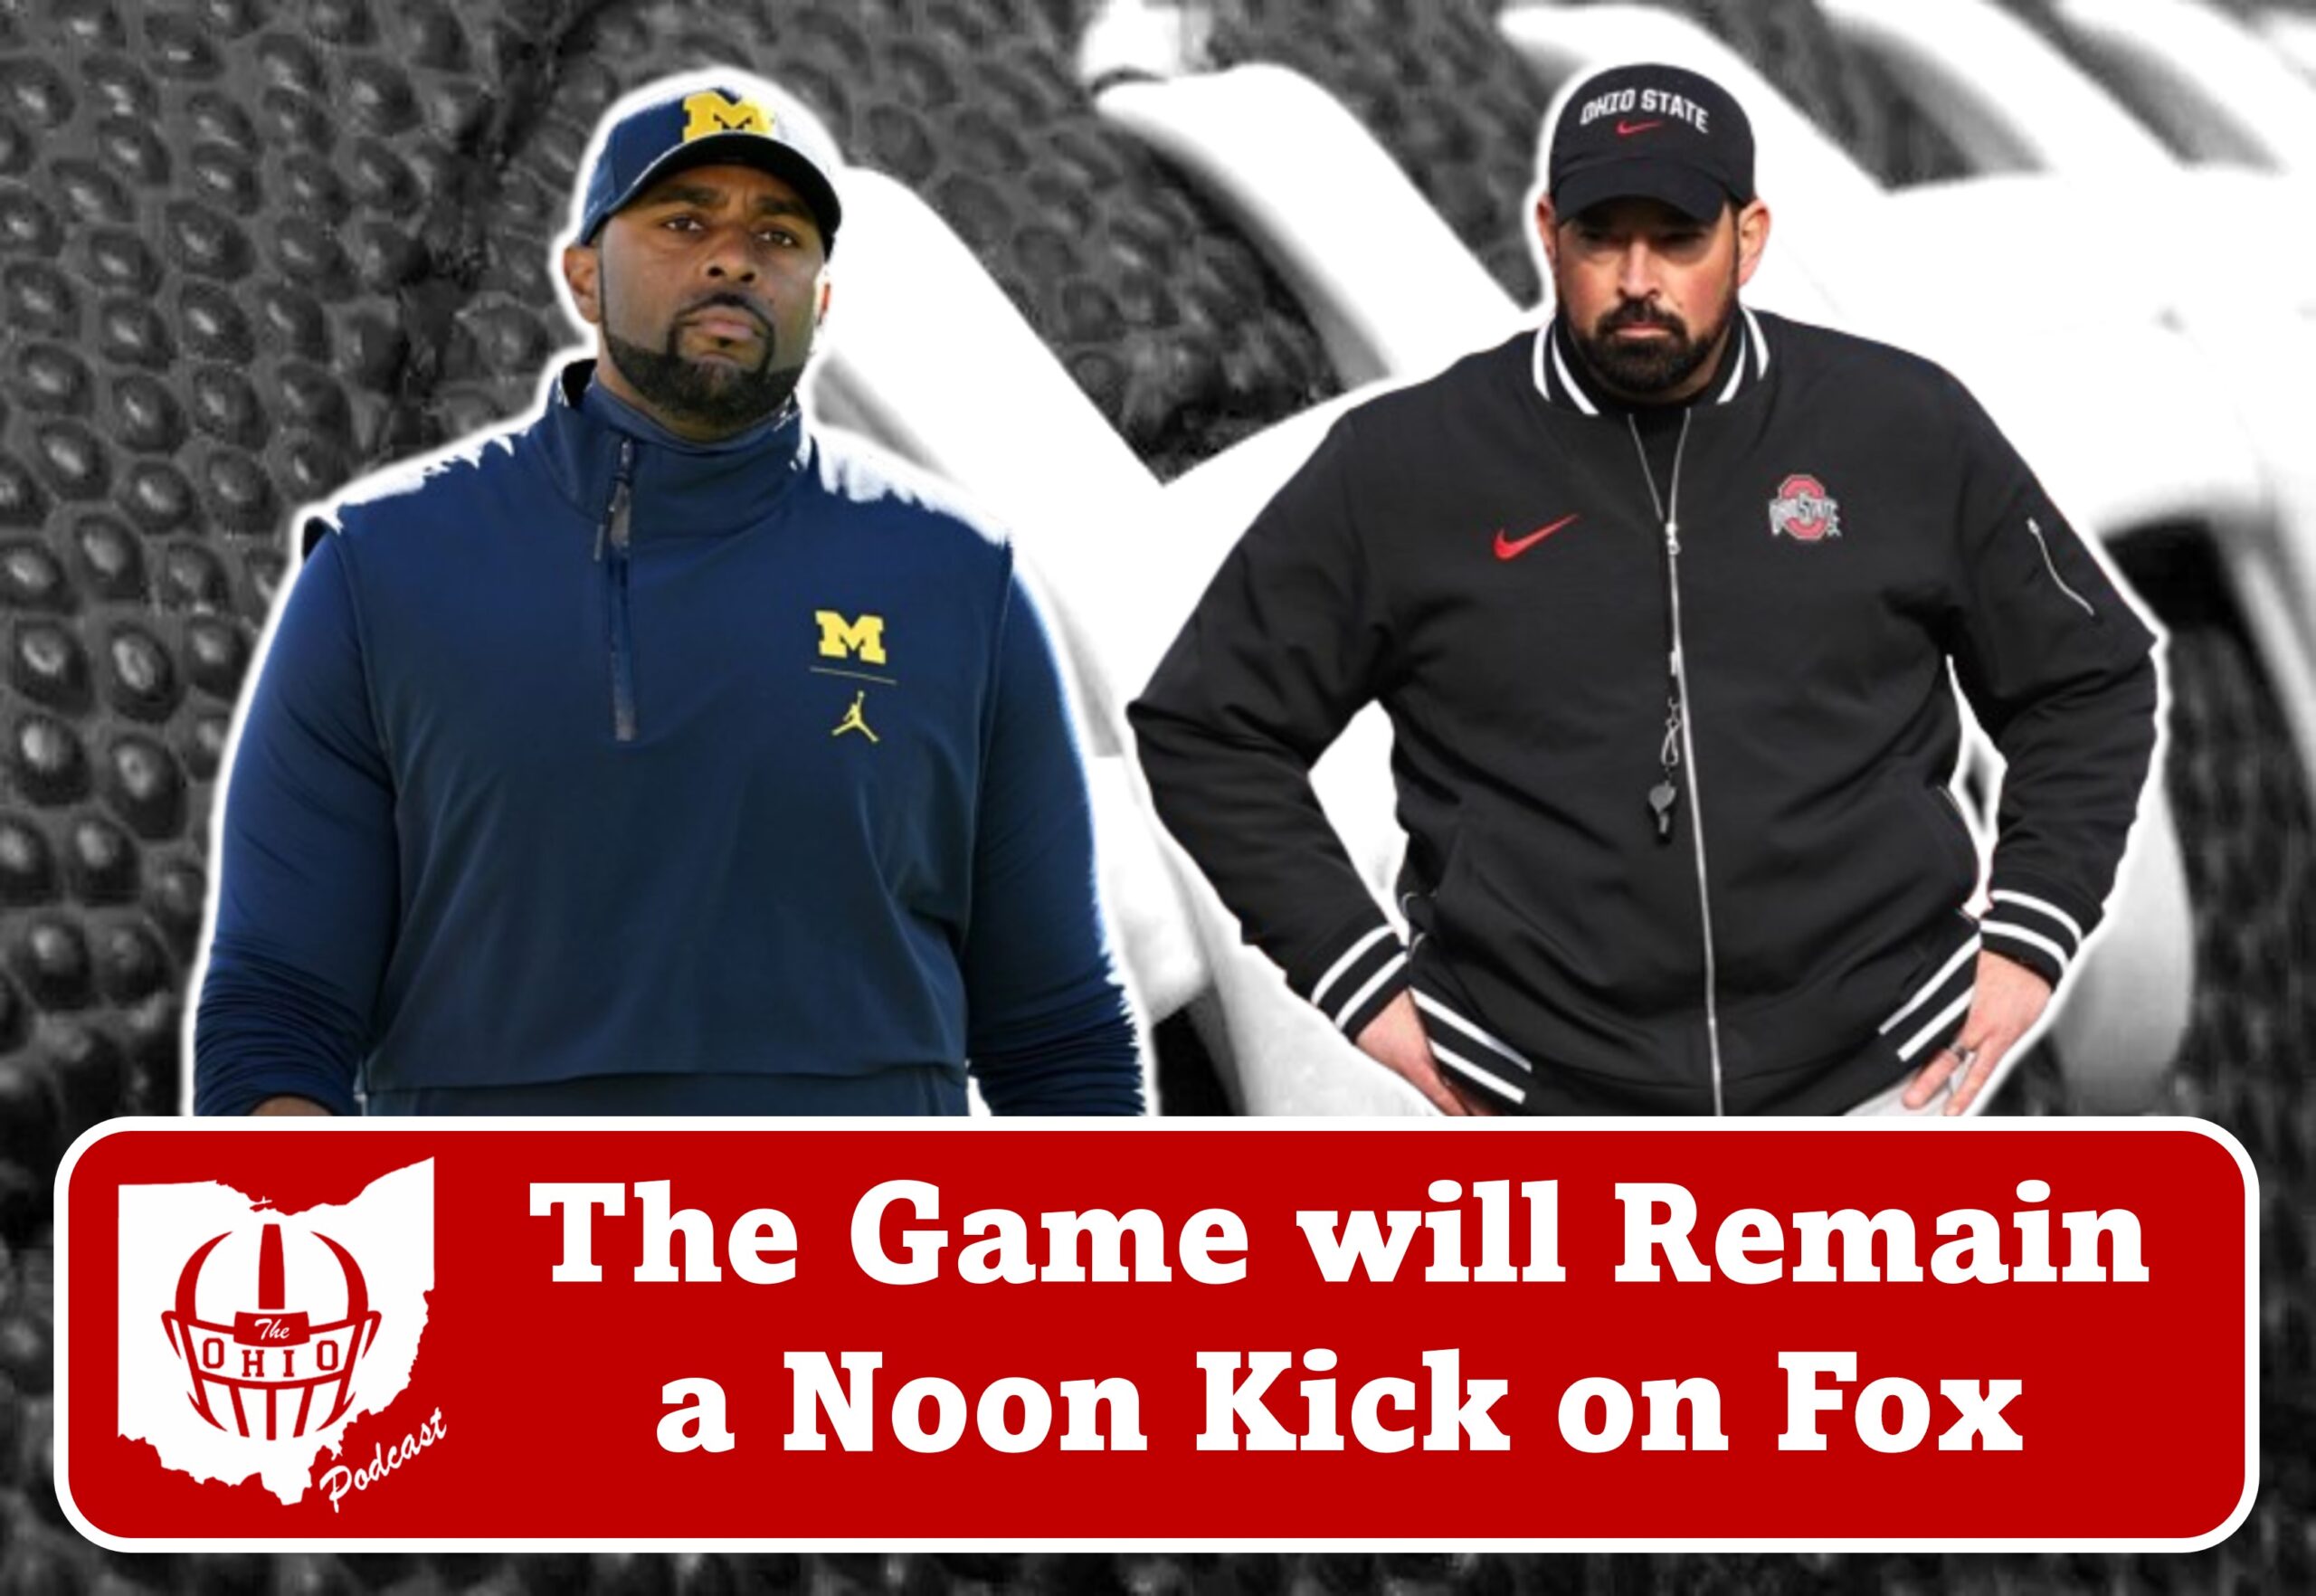 The Game will Remain a Noon Kick on Fox